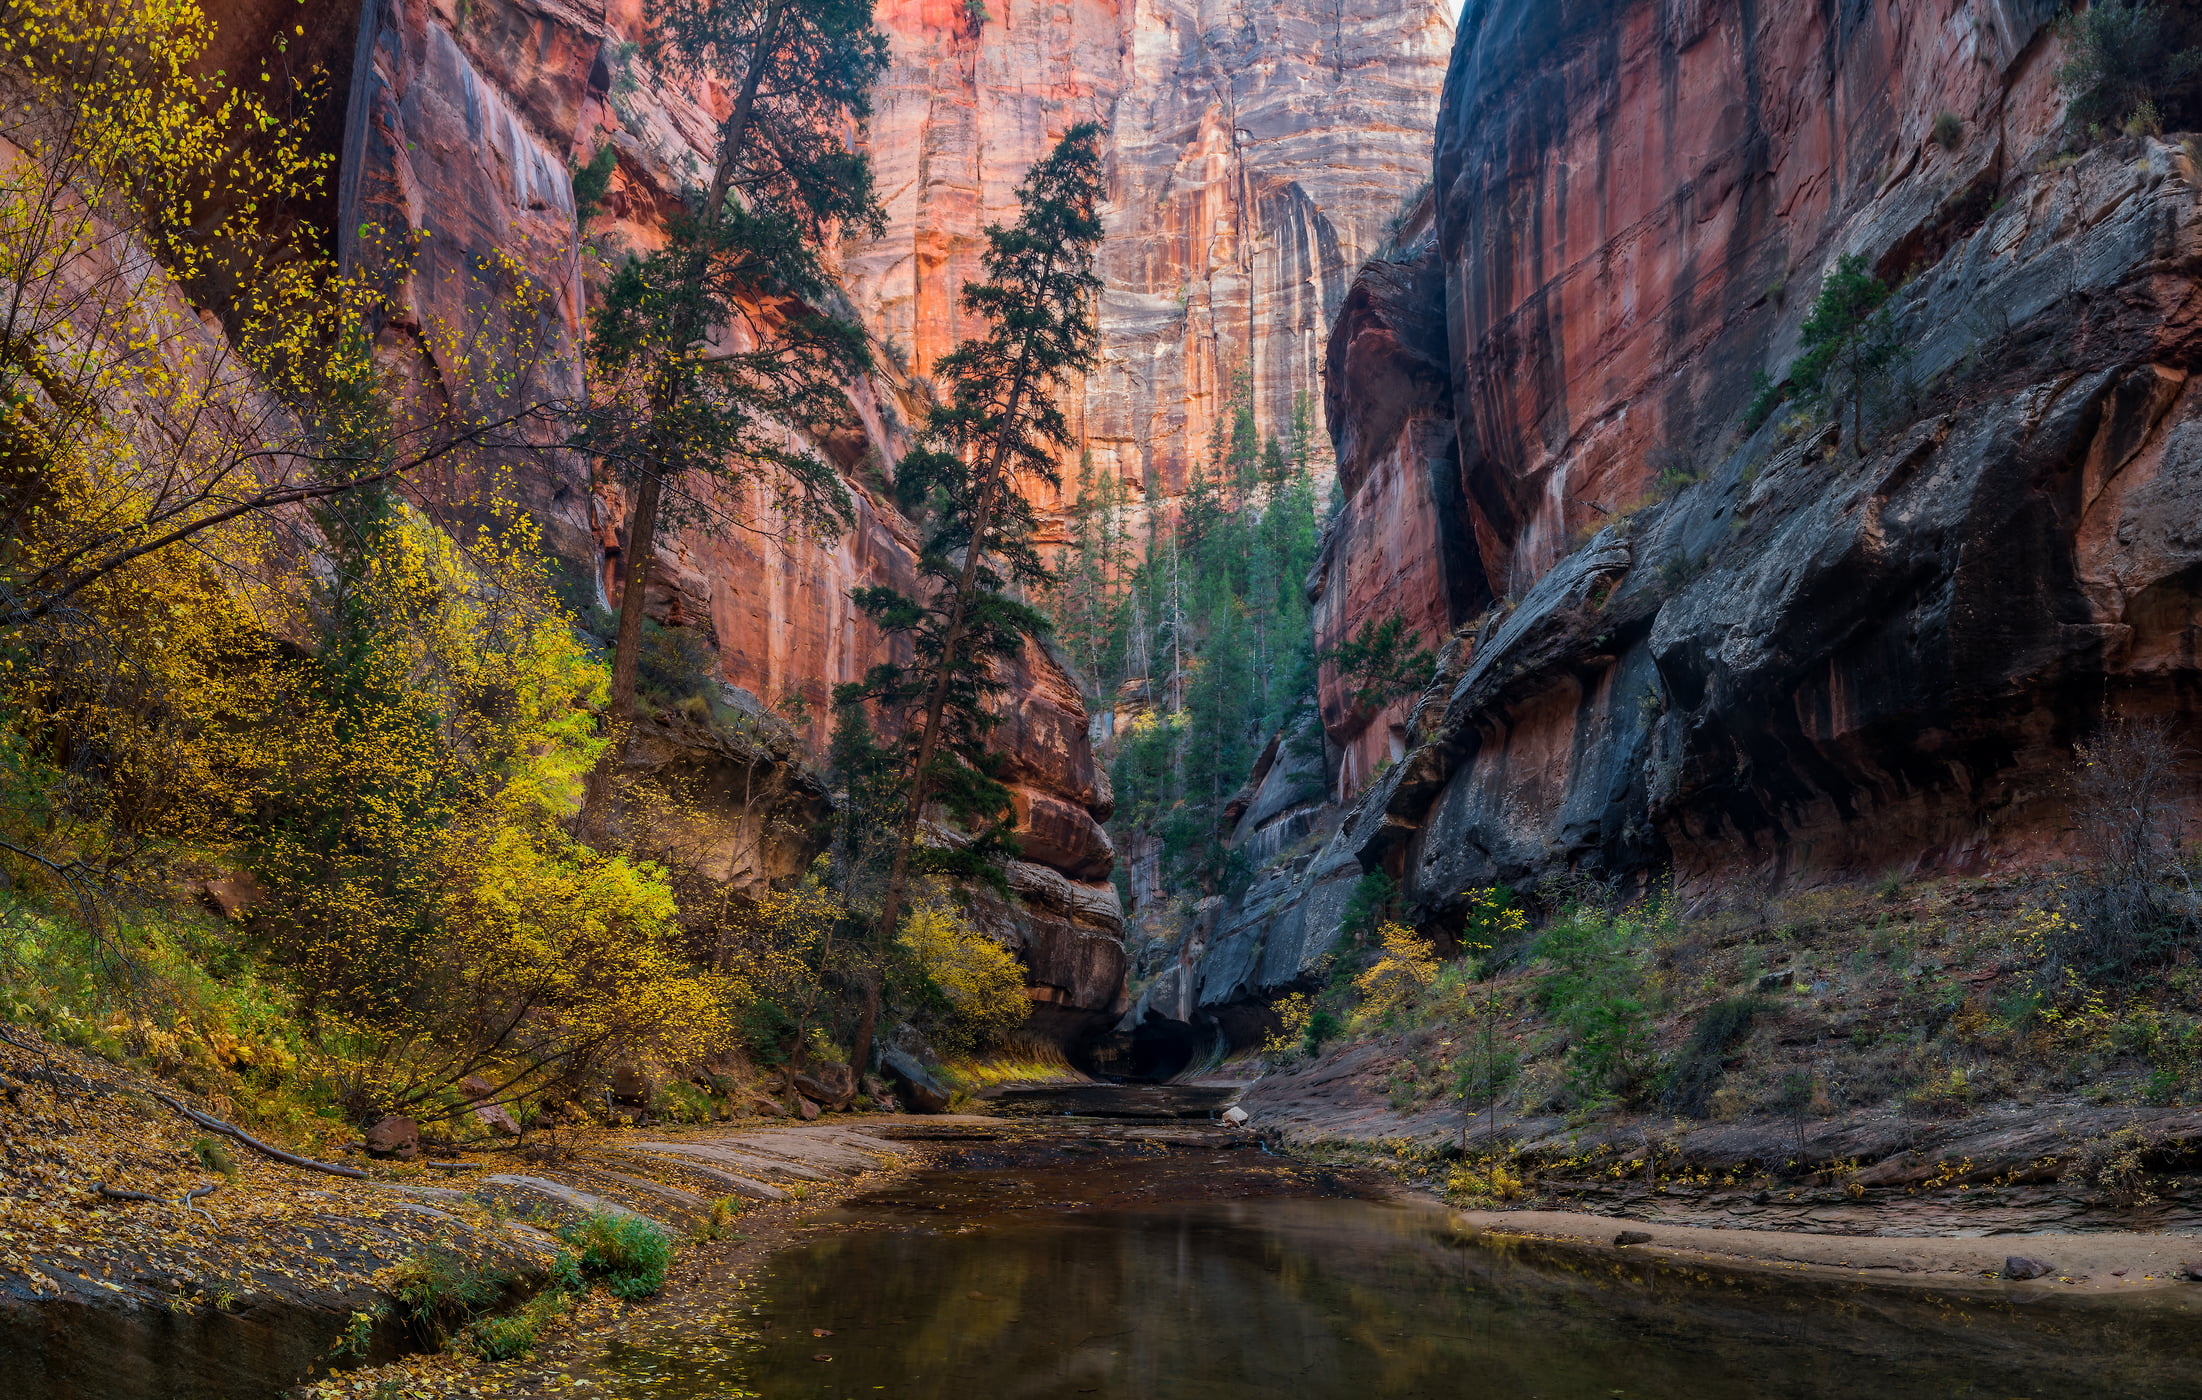 130 megapixels! A very high resolution, large-format VAST photo print of a stream in a canyon in autumn; nature photograph created by Phillip Noll in Zion National Park, Utah